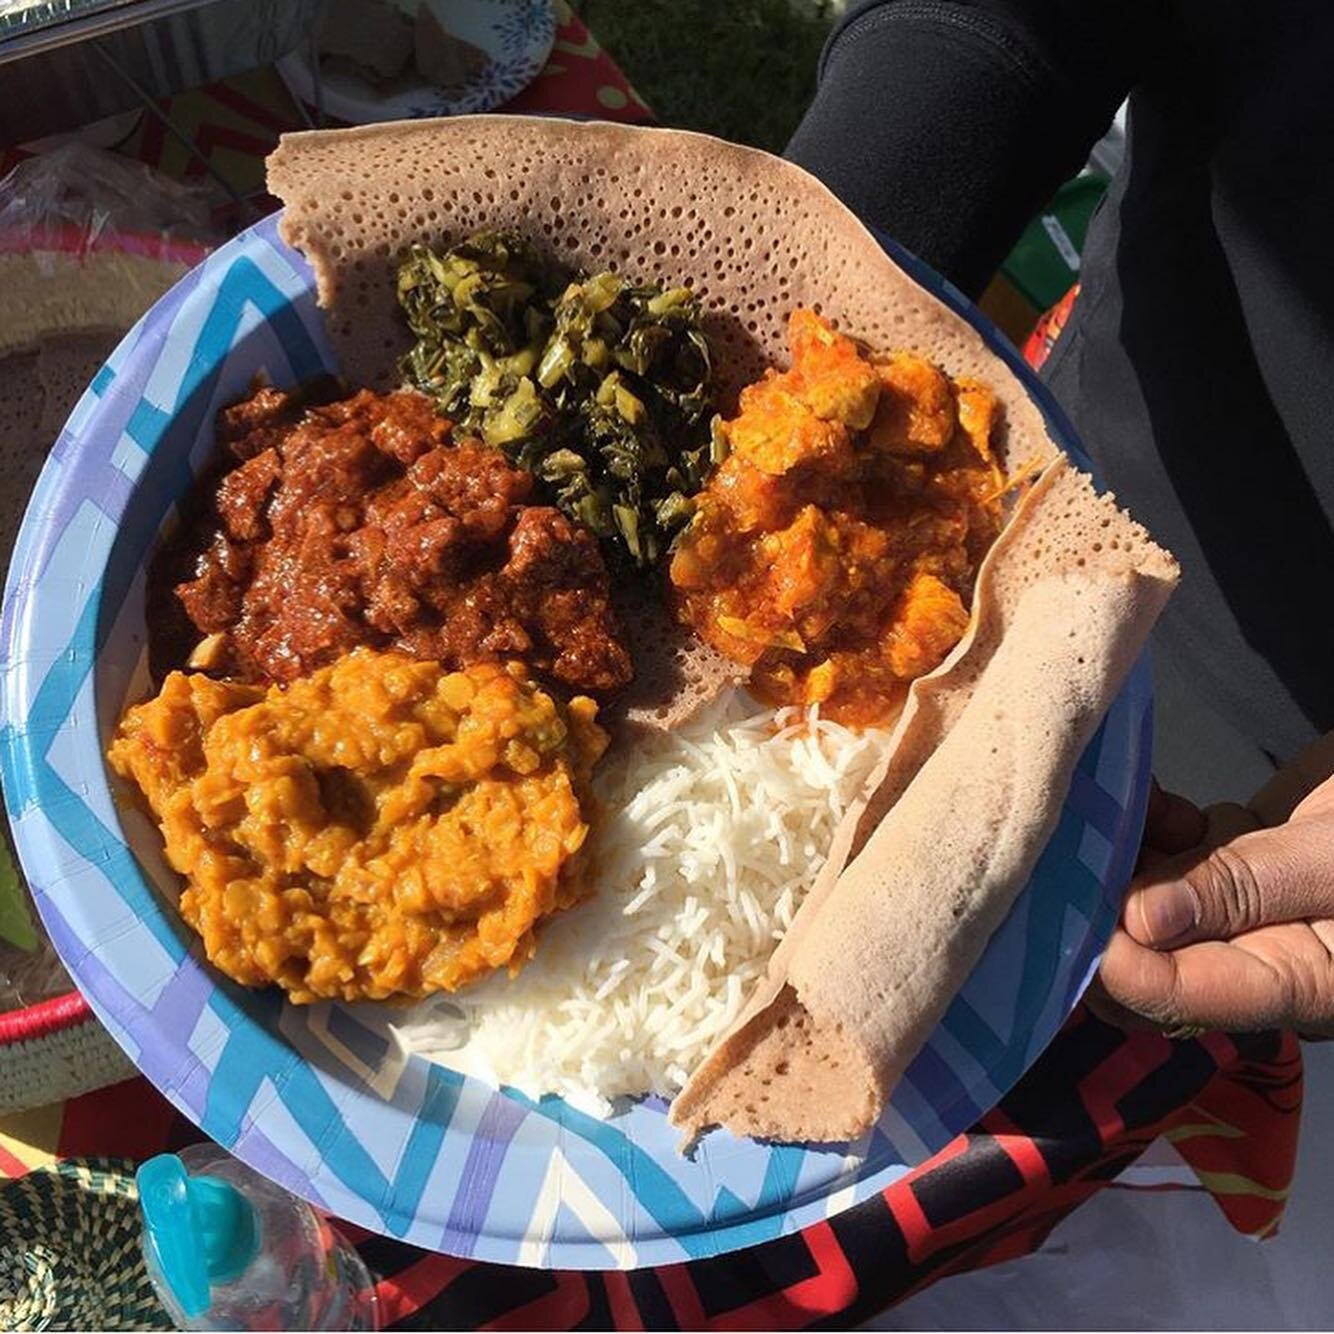 We&rsquo;re really excited to share that Ethiopian/Eritrean Cuisine made by Mulu will be at the @waitsfieldfarmersmarket tomorrow. Come pick up meals to go for a picnic lunch, dinner or meals later in the week. **Please note that these pics are from 